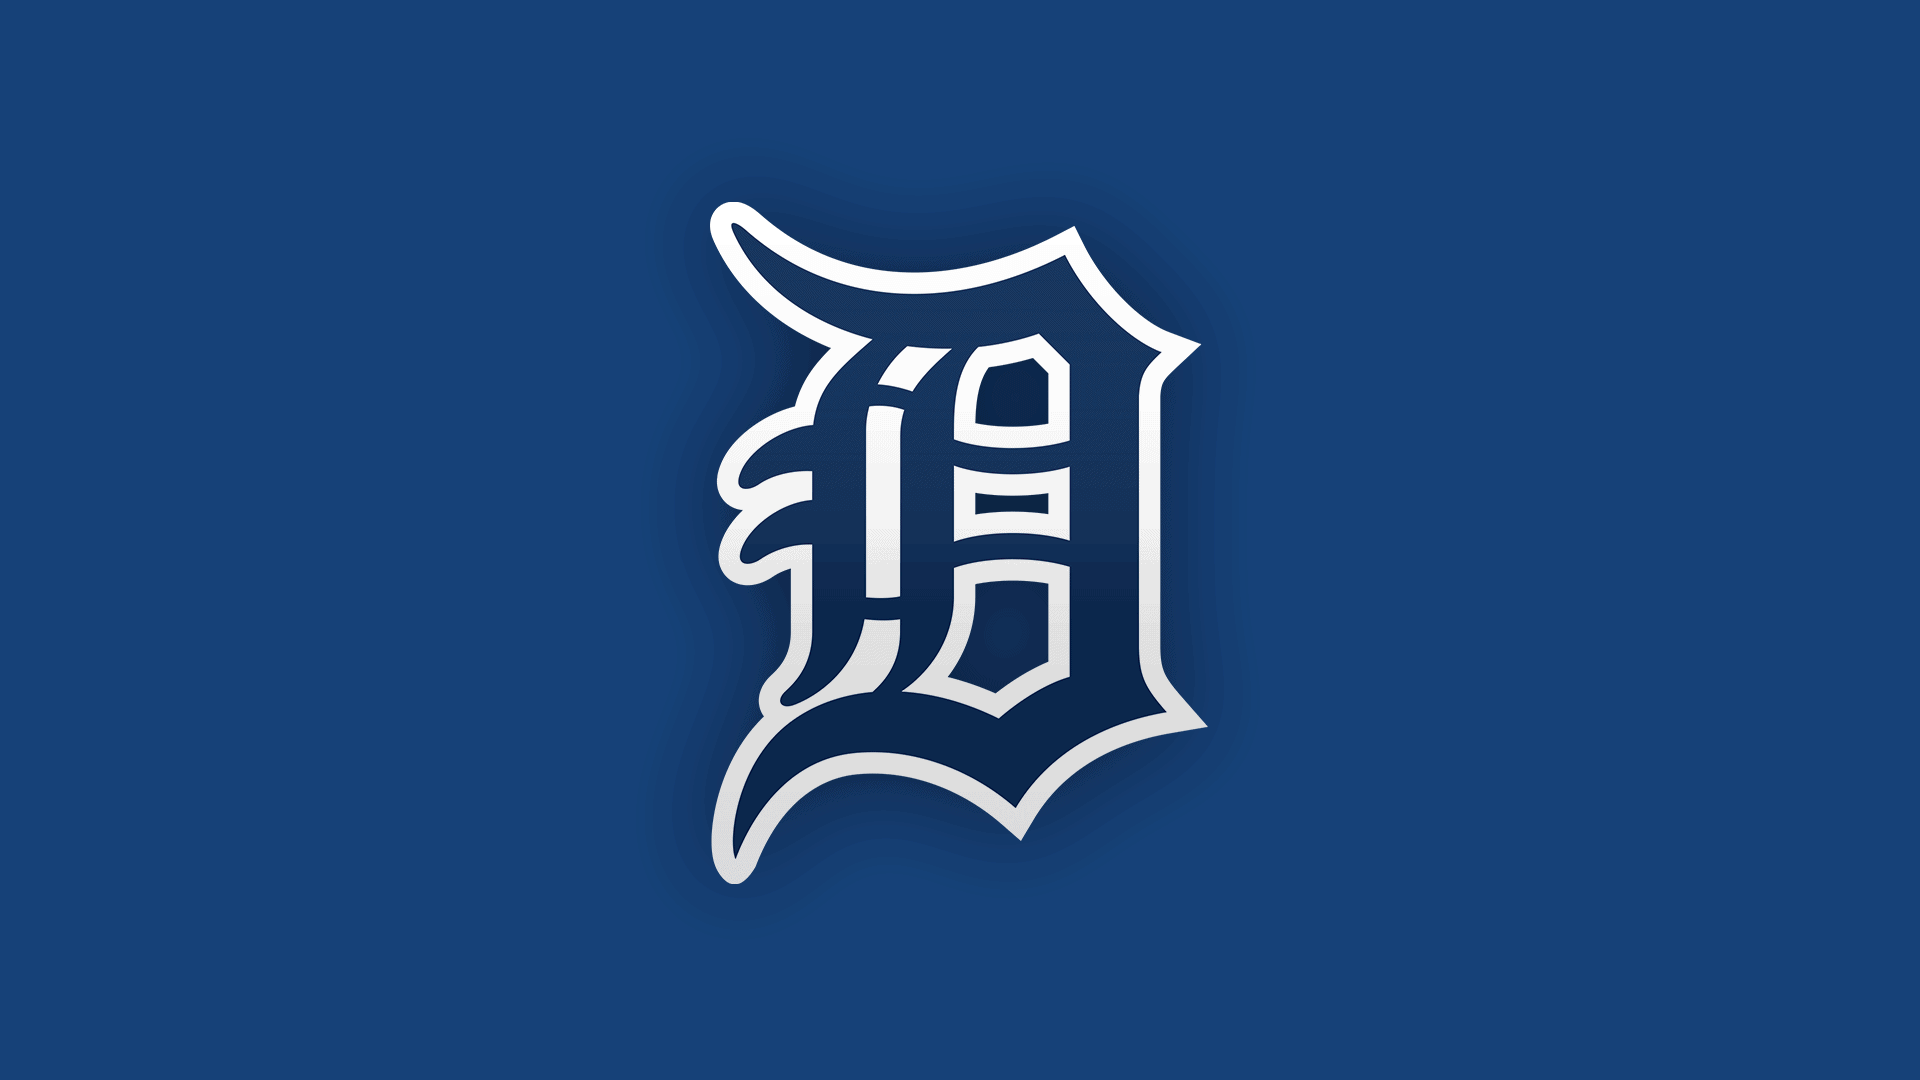 Detroit Tigers Odds Beer Girl Joey Wentz Tyler Holton Luis Santana Tim Naughton Rich Hill Joe Rizzo Miami Marlins Blair Calvo Detroit Tigers Top Prospects Tyler Nevin Riley Greene Spencer Torkelson Isan Diaz Detroit Tigers to call up Sawyer Gibson-Long 2024 Detroit Tigers Opening Day Lineup Detroit Tigers hire former World Series Champion Joey Cora Detroit Tigers earn bonuses Detroit Tigers Opening Day Starting Lineup